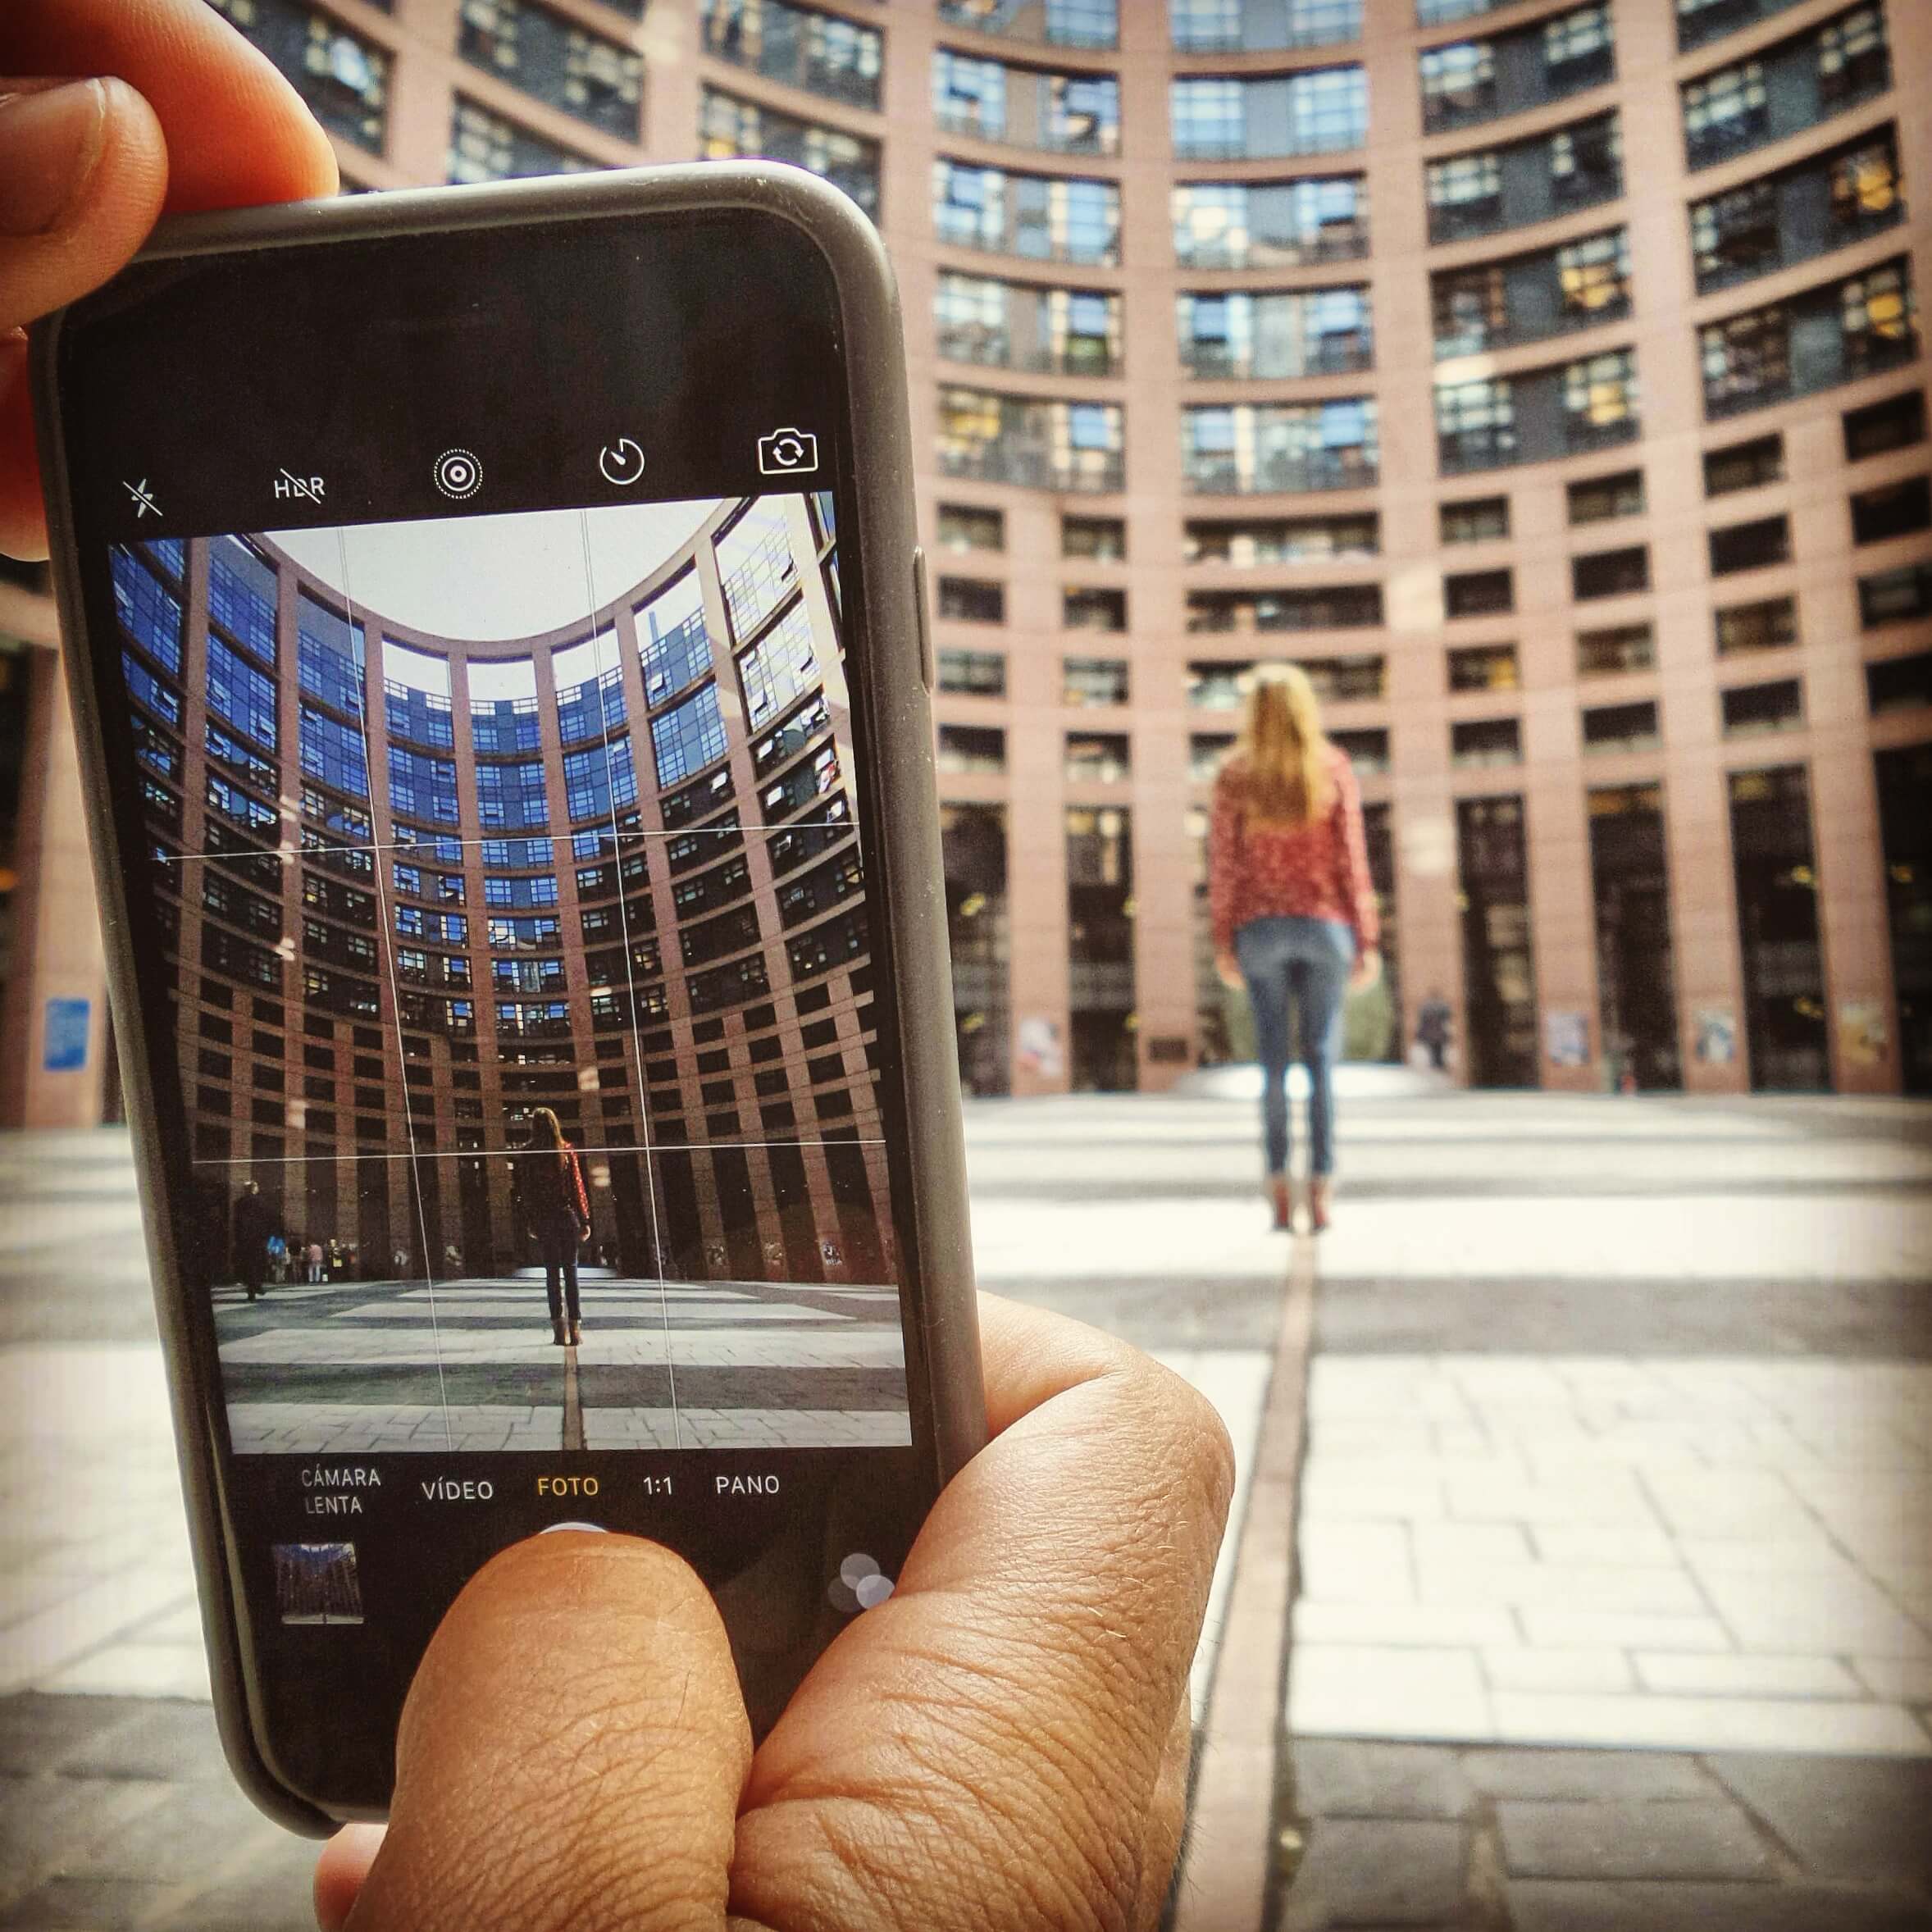 Europees Parlement in Brussel